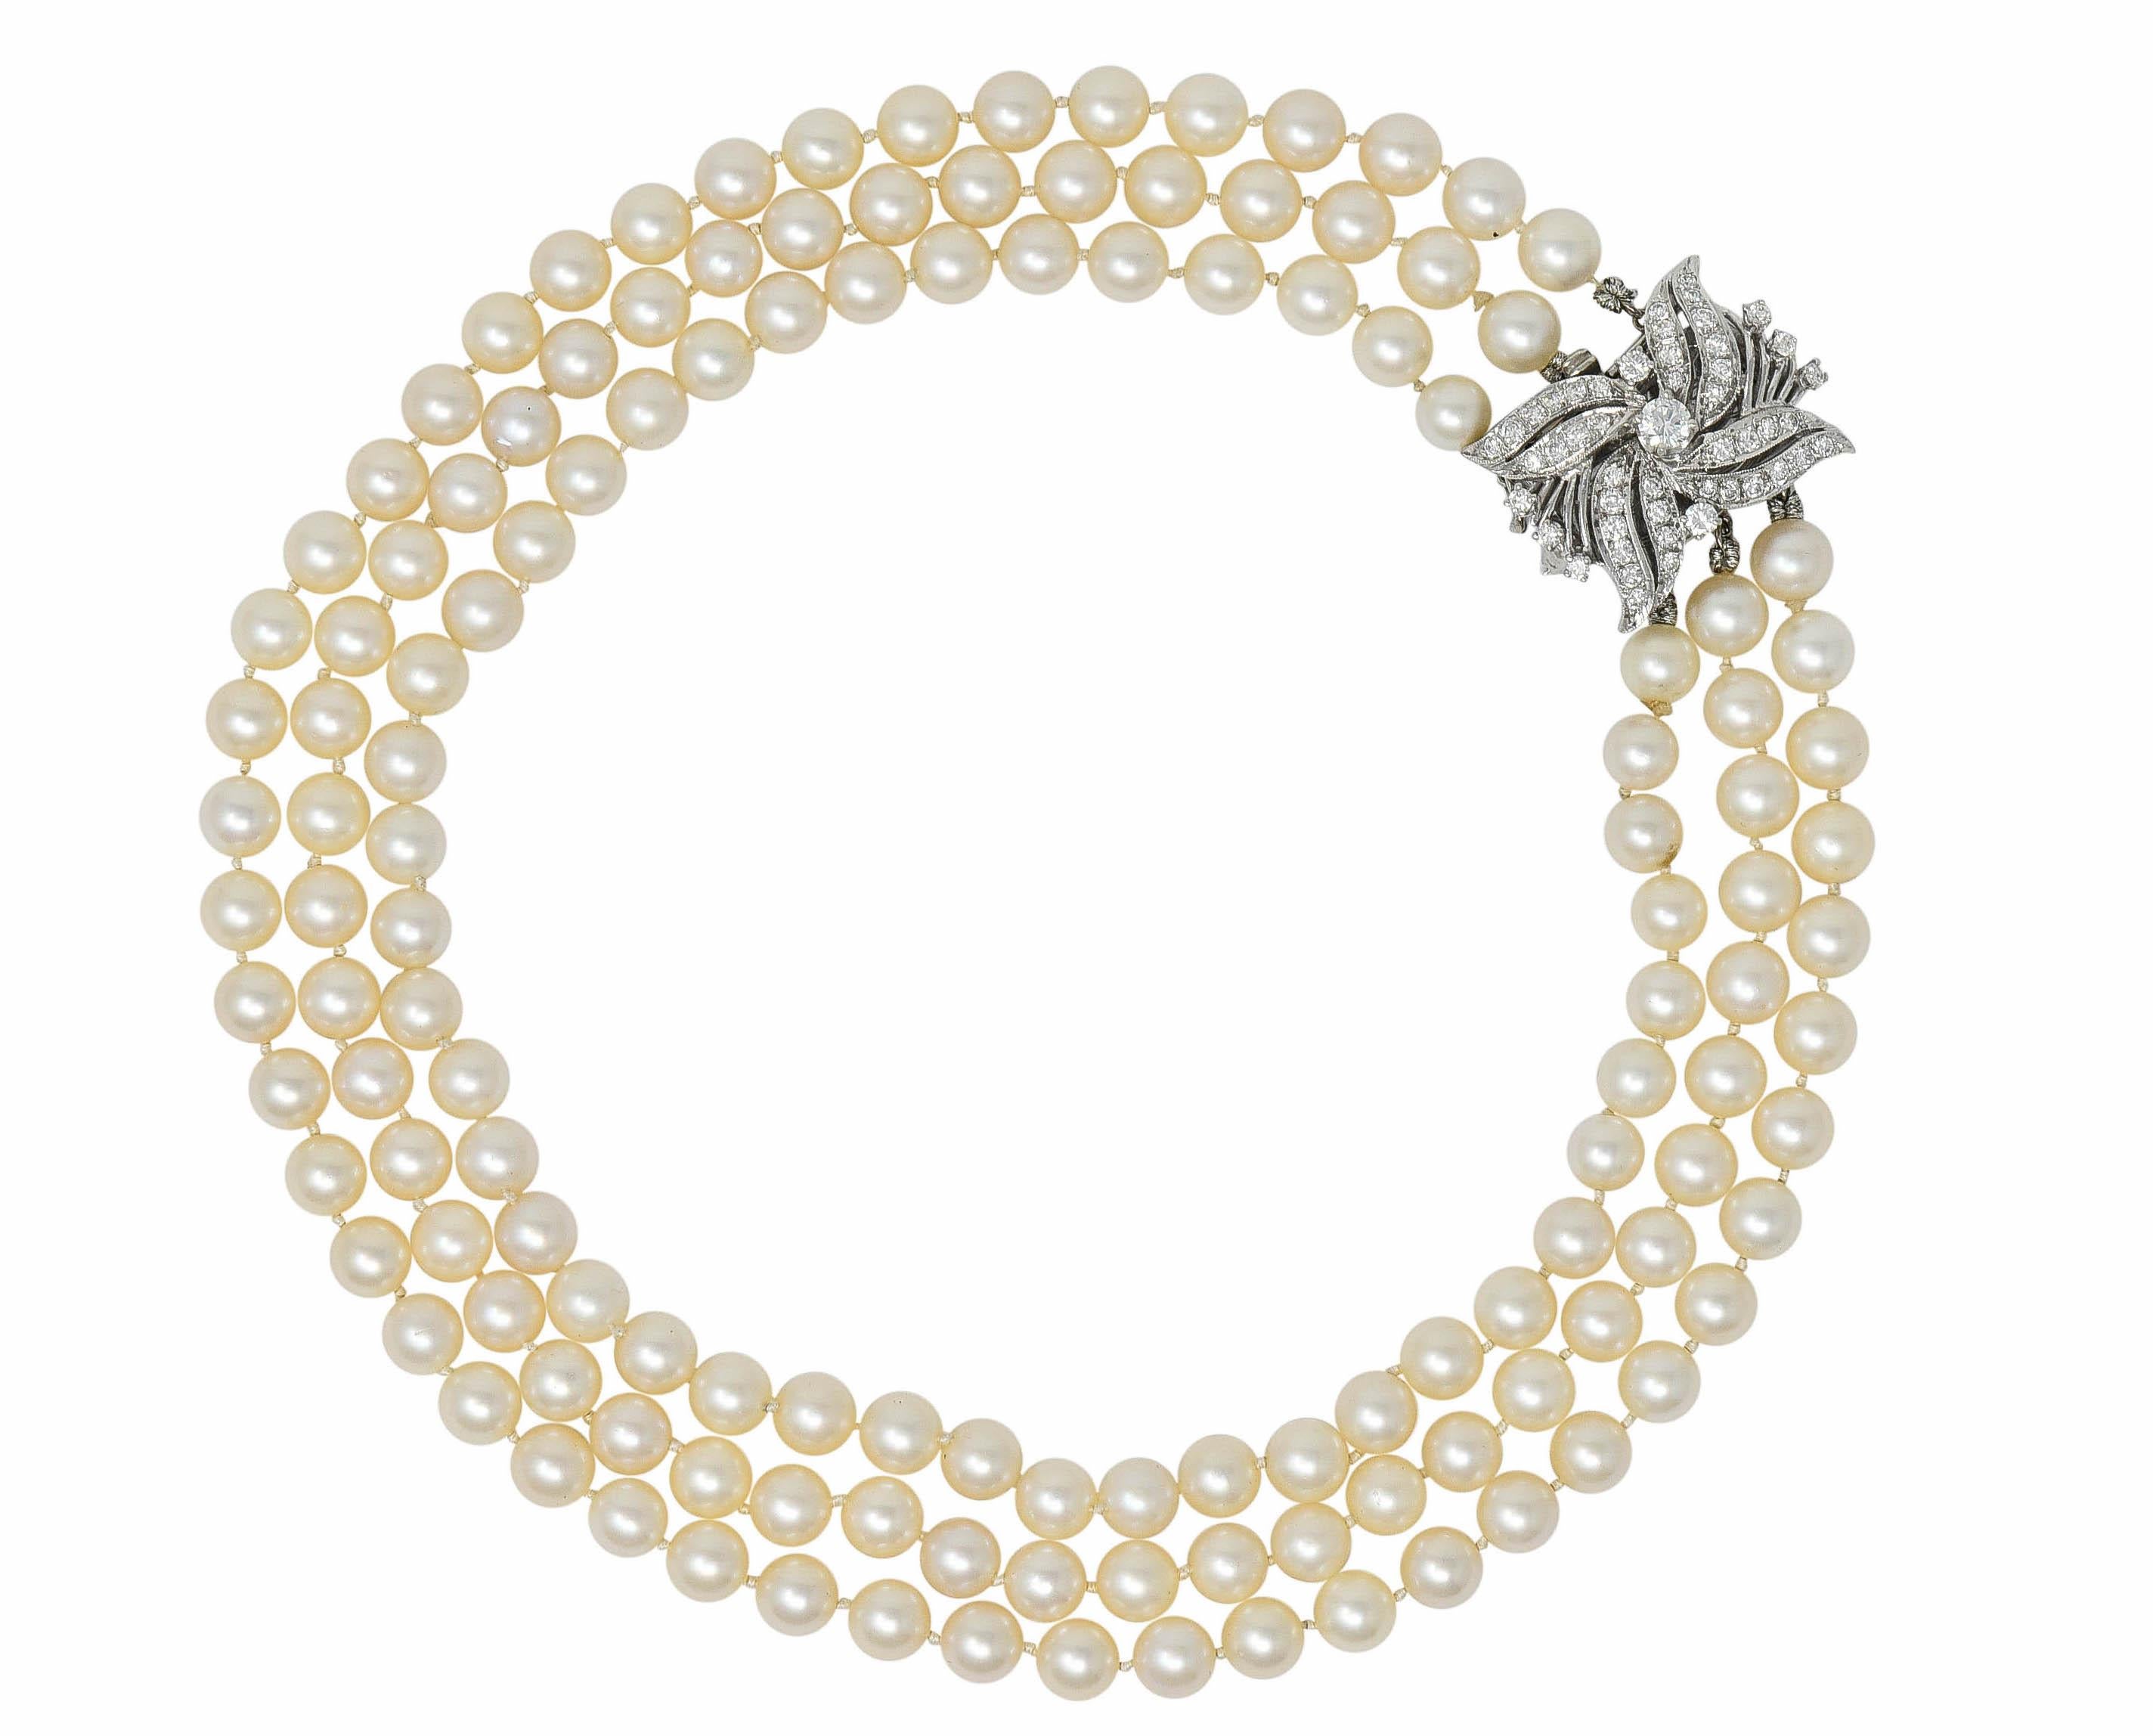 Necklace is comprised of three hand-knotted stands of 7.2 mm round cultured pearls

Very well-matched cream body color with rosè overtones and very good luster

Completing as a white gold clasp with detachable floral diamond brooch

Total diamond